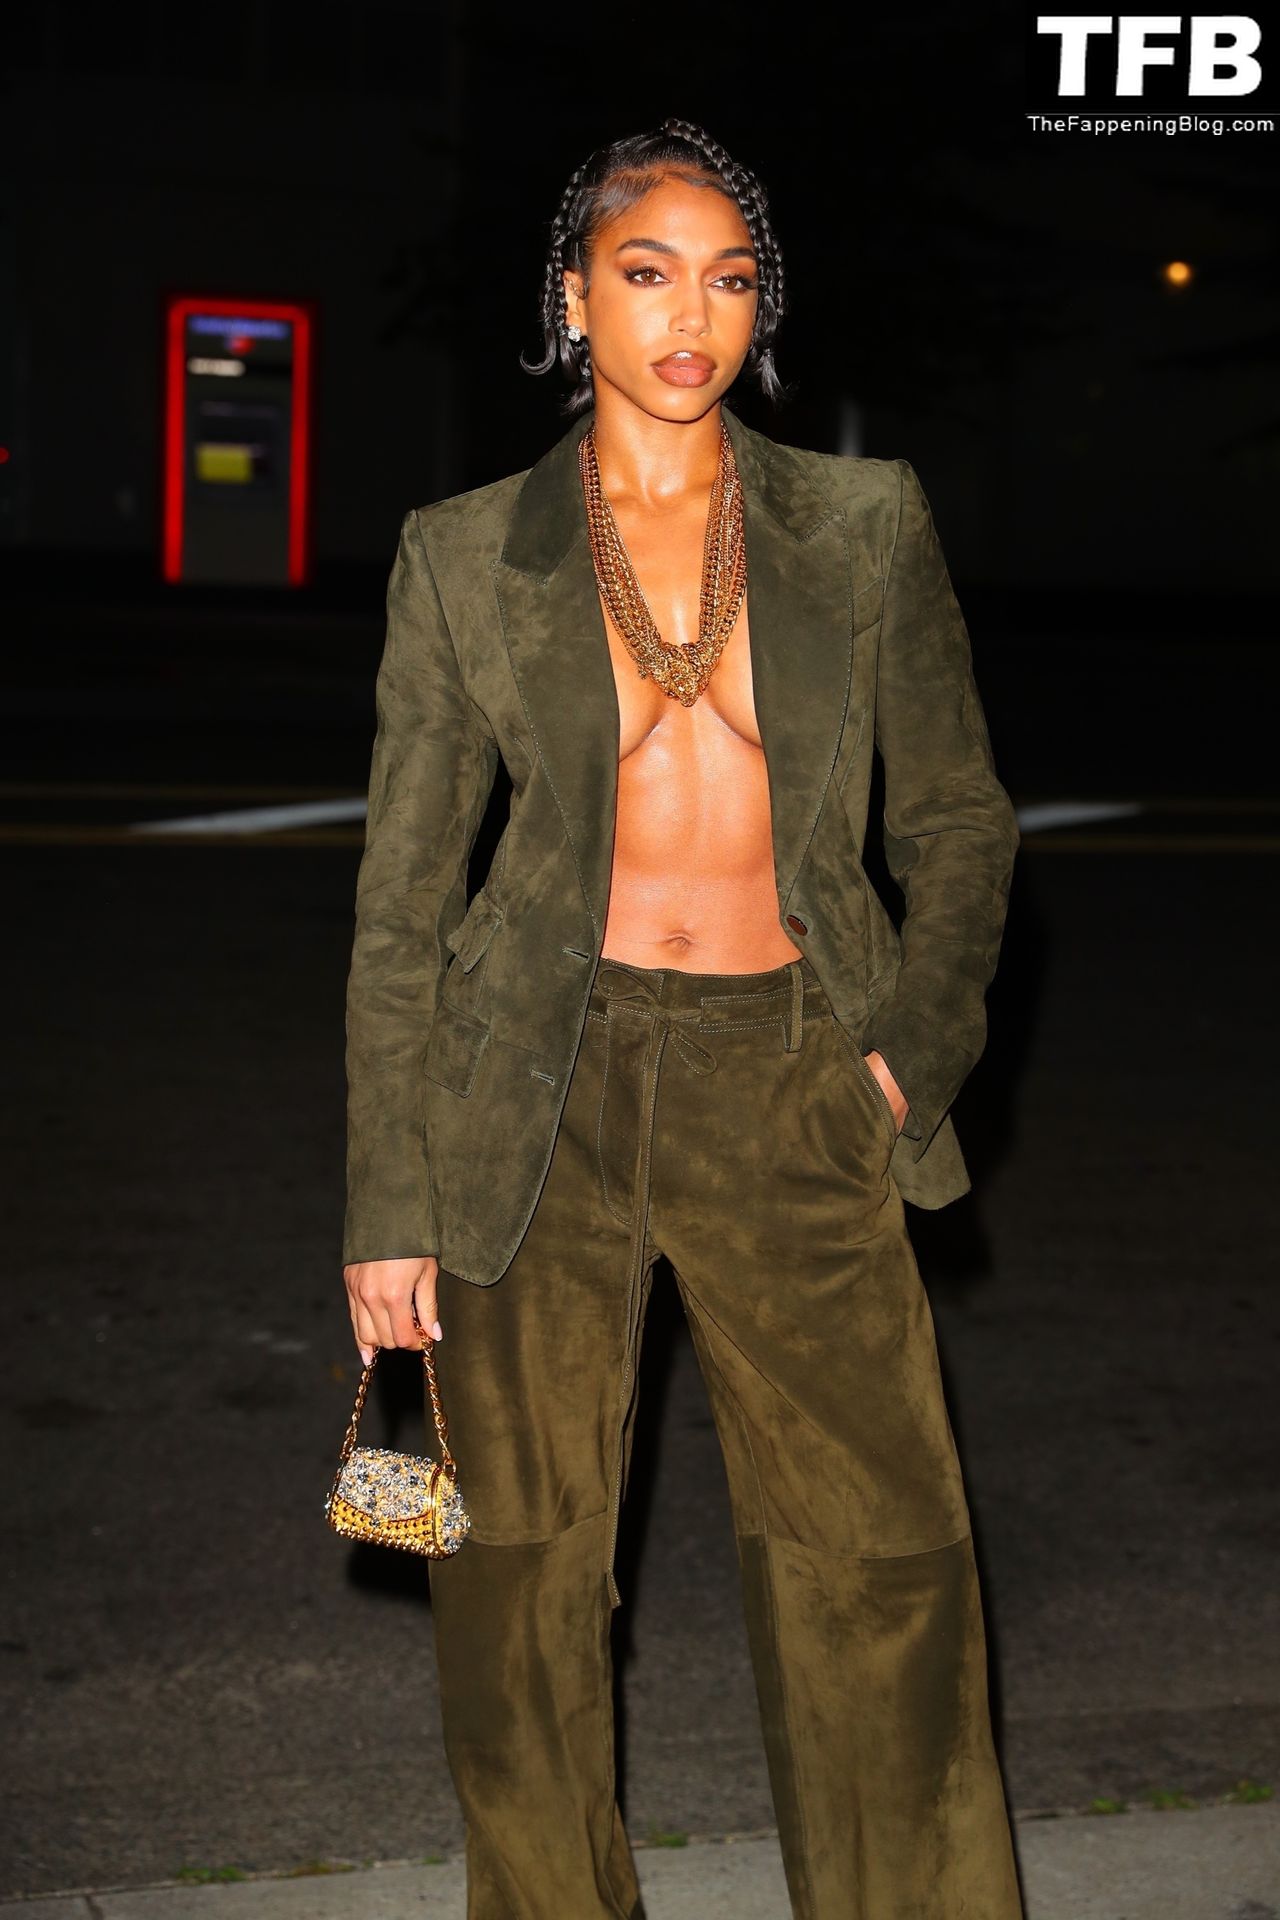 Lori Harvey Sexy The Fappening Blog 26 - Lori Harvey Shows Off Her Tits at the Tom Ford Fashion Show (38 Photos)